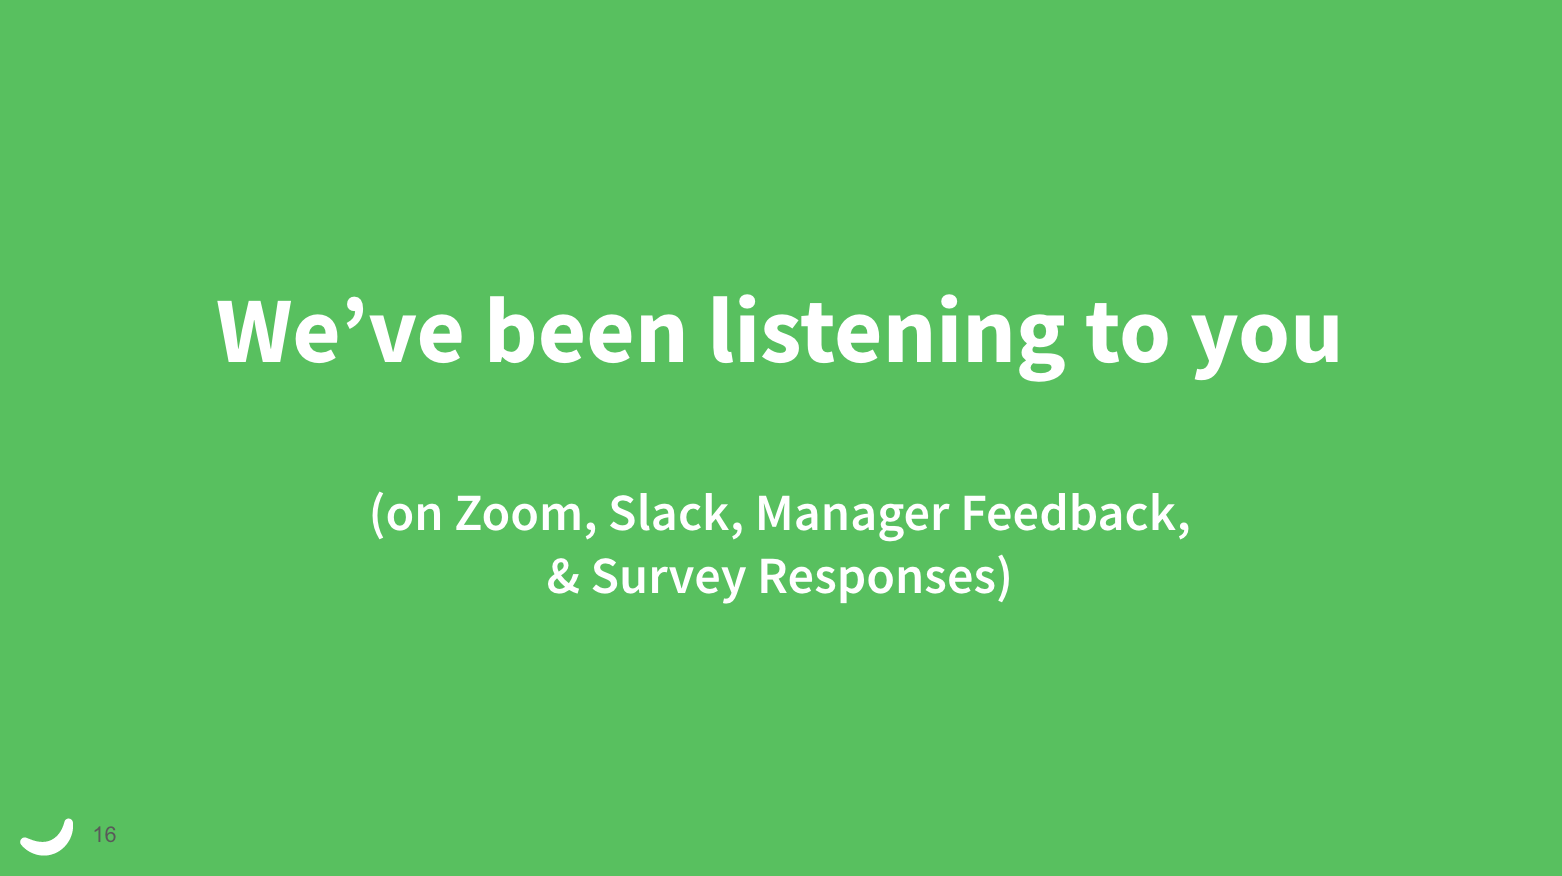 Powerpoint slide that says: 'We've been listening to you on Zoom, Slack, Manager Feedback, and Survey Responses)